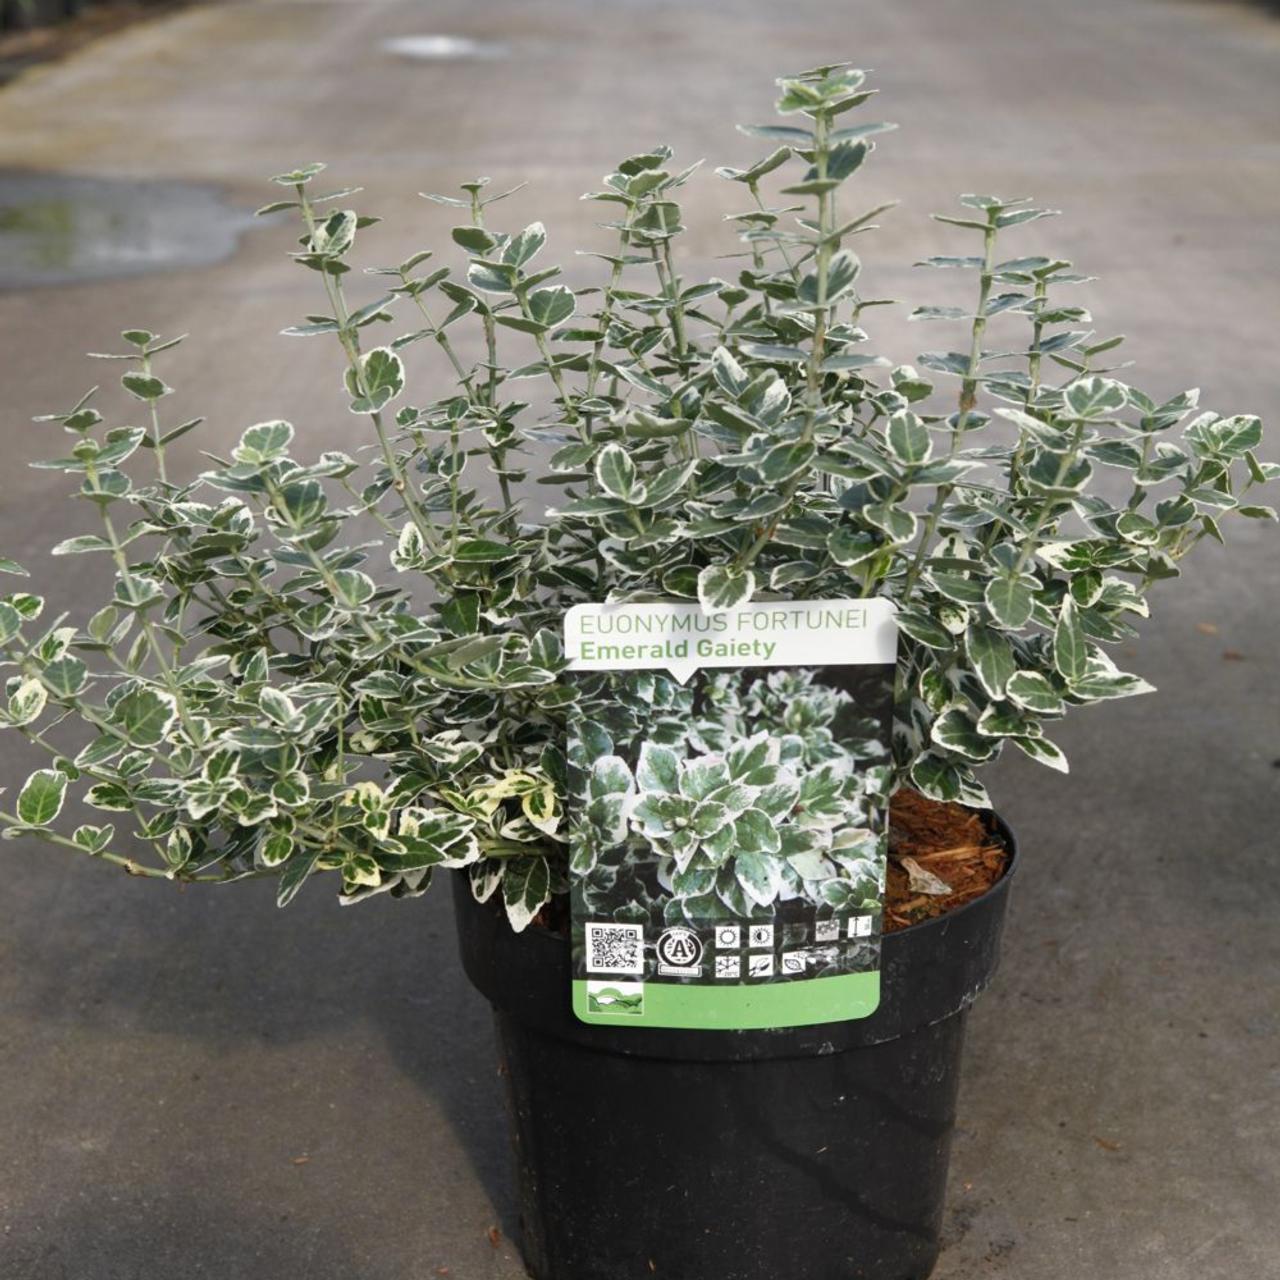 Euonymus fortunei 'Emerald Gaiety' plant